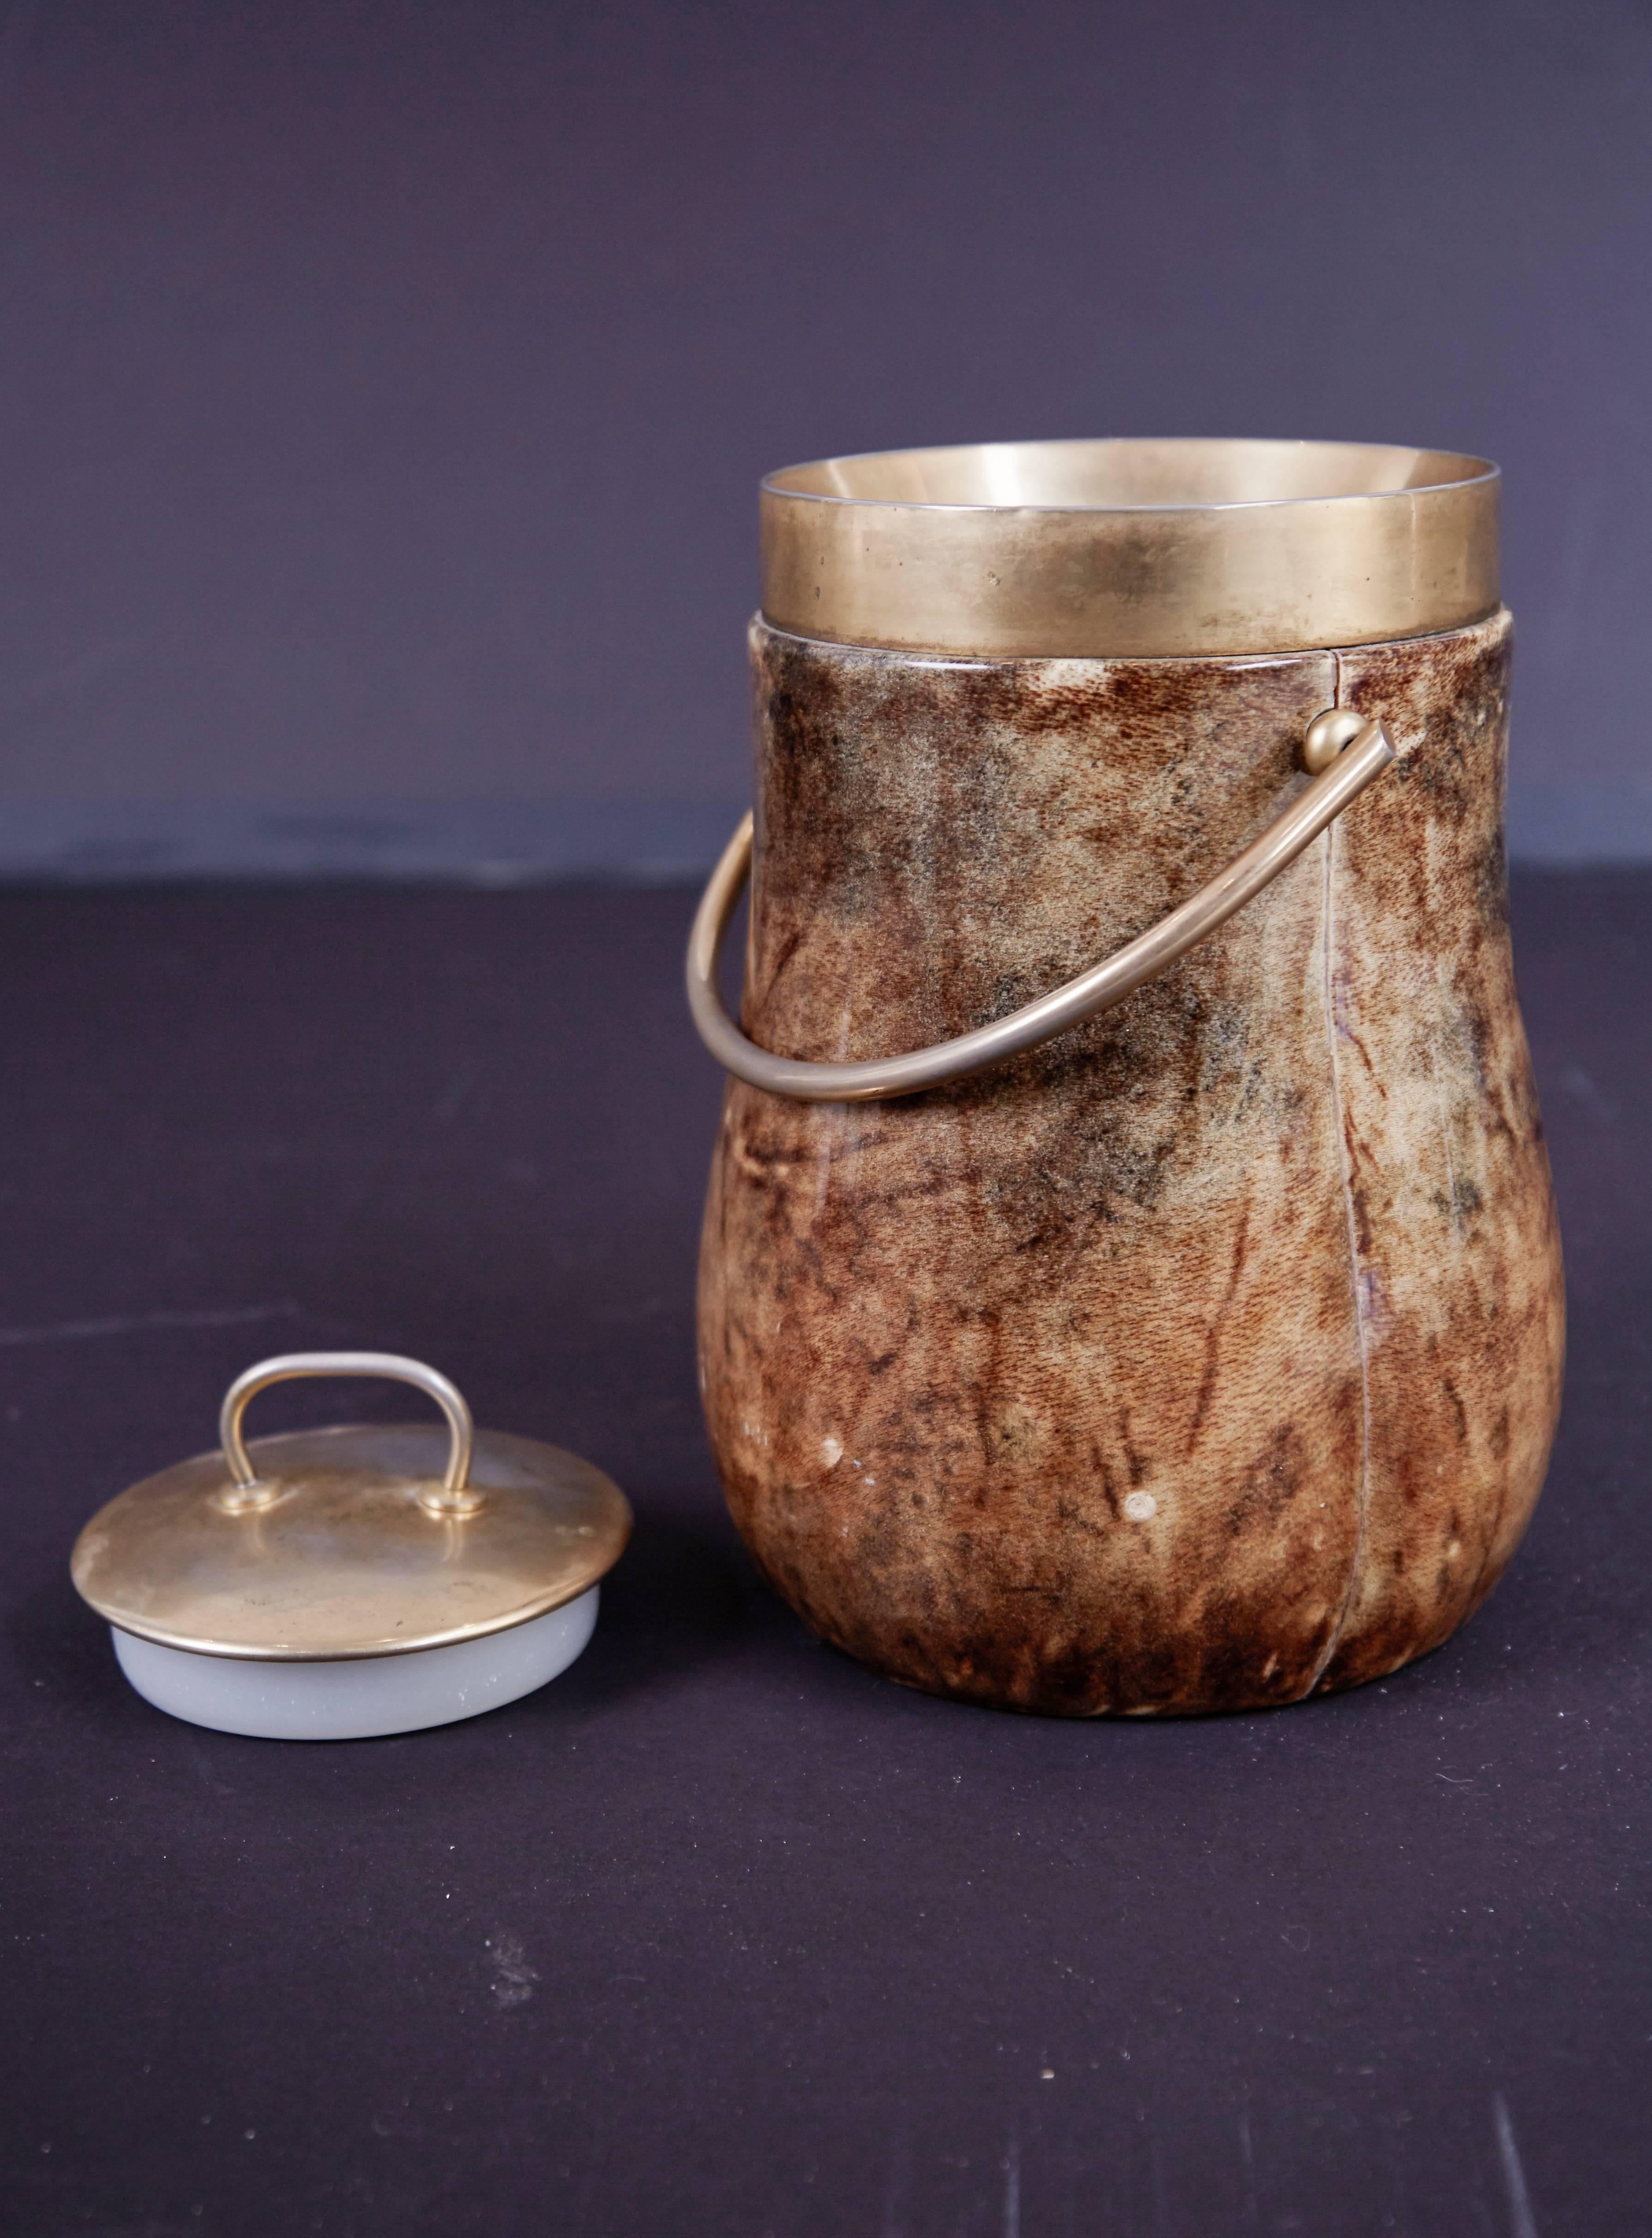 Beautiful ice bucket by Italian artist-craftsman Aldo Tura, featuring the designers distinct use of goatskin which Tura was well known for. The quality of Tura's craftsmanship can be attributed to the fact that his work was only produced in a